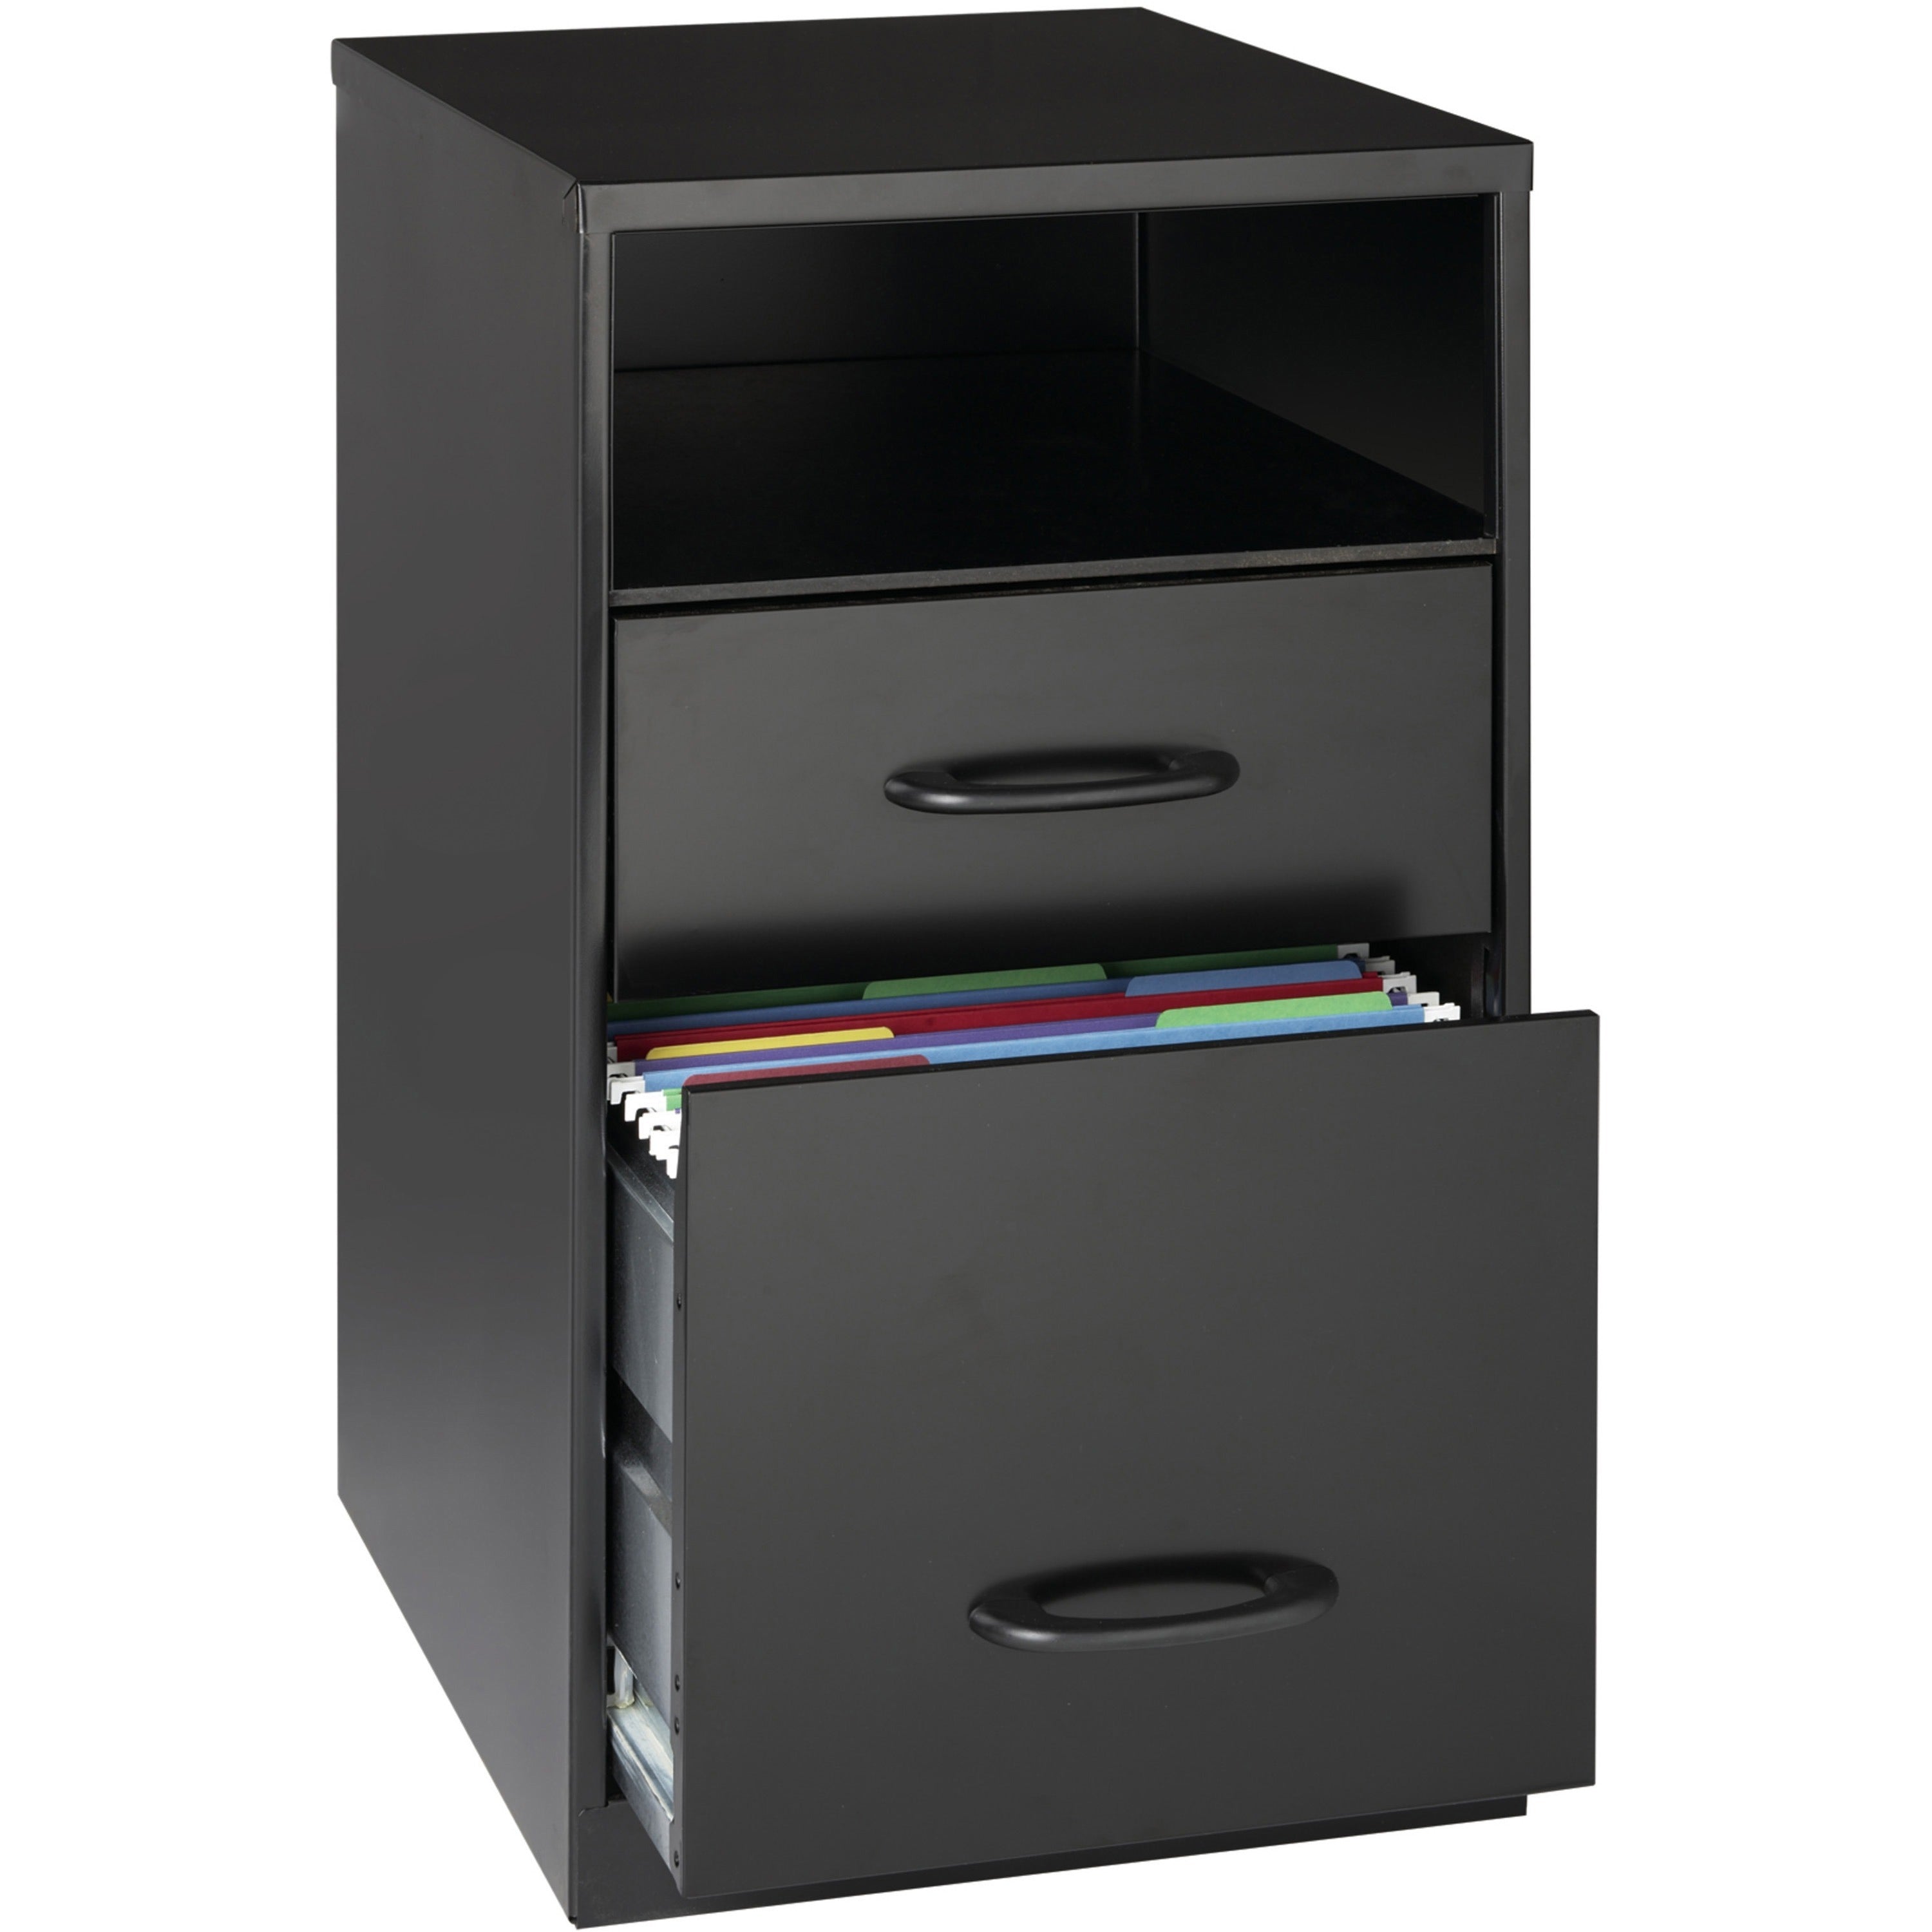 nusparc-file-organizer-cabinet-142-x-18-x-245-2-x-drawers-for-file-letter-glide-suspension-3-4-drawer-extension-anti-tip-nonporous-surface-black-metal-recycled_nprvf318ddbk - 1